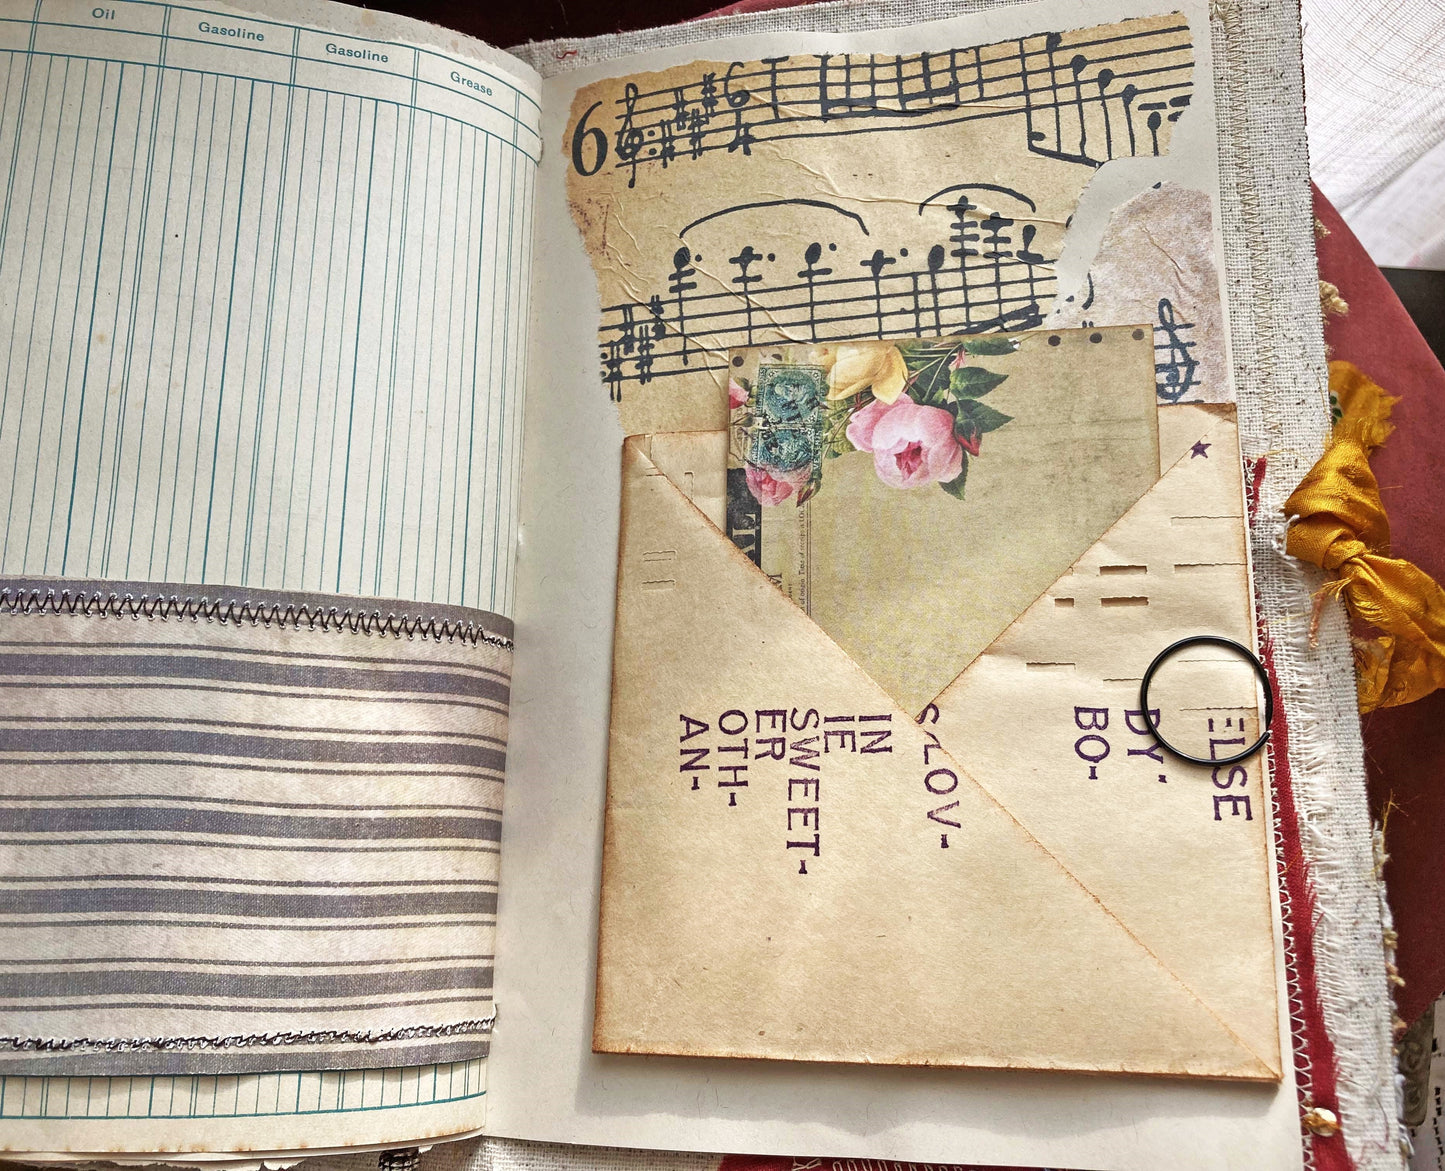 Carpetbagger Journal with Upholstery Fabric Cover, Vintage Style Junk Journal, Room for Journaling and Photos